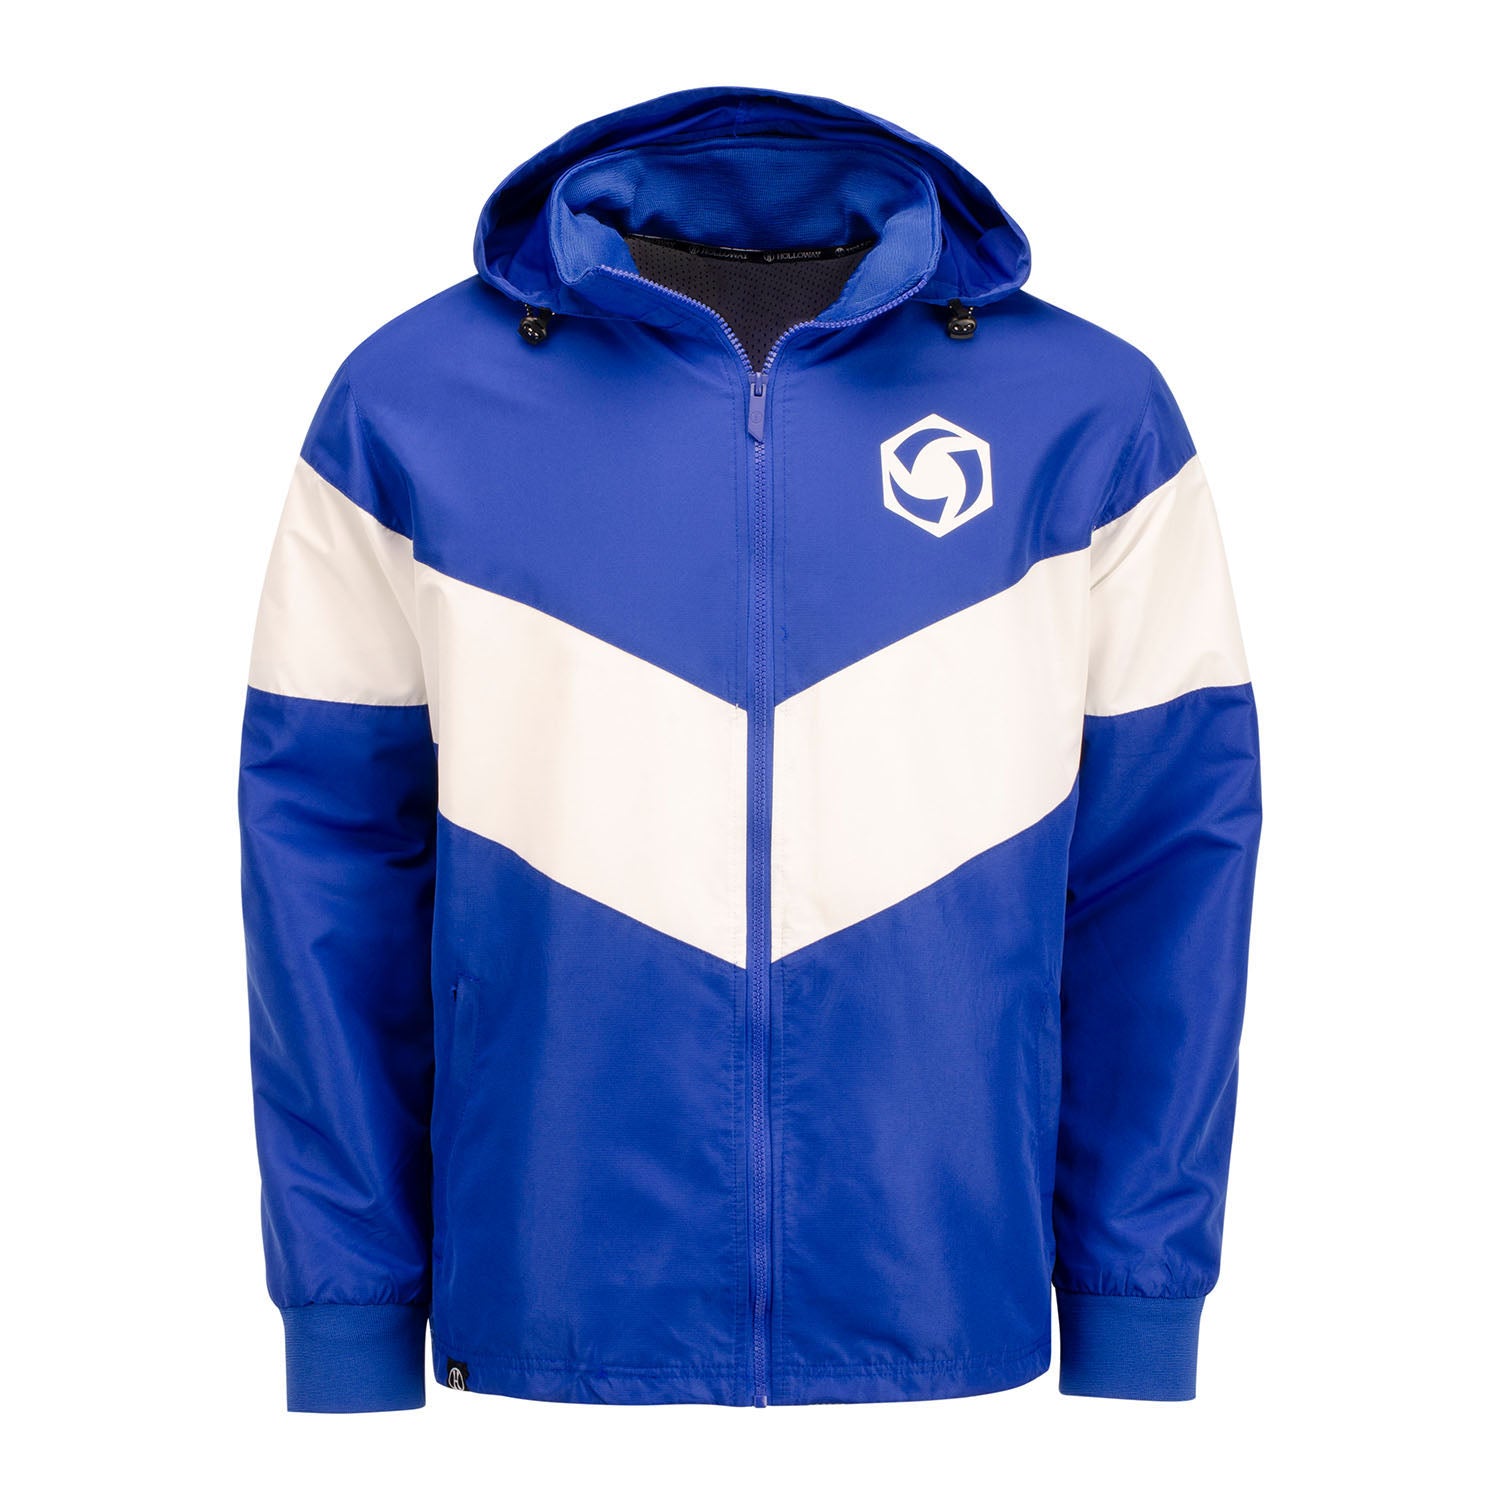 Heroes of the Storm Royal Blue Color Block Jacket - Front View